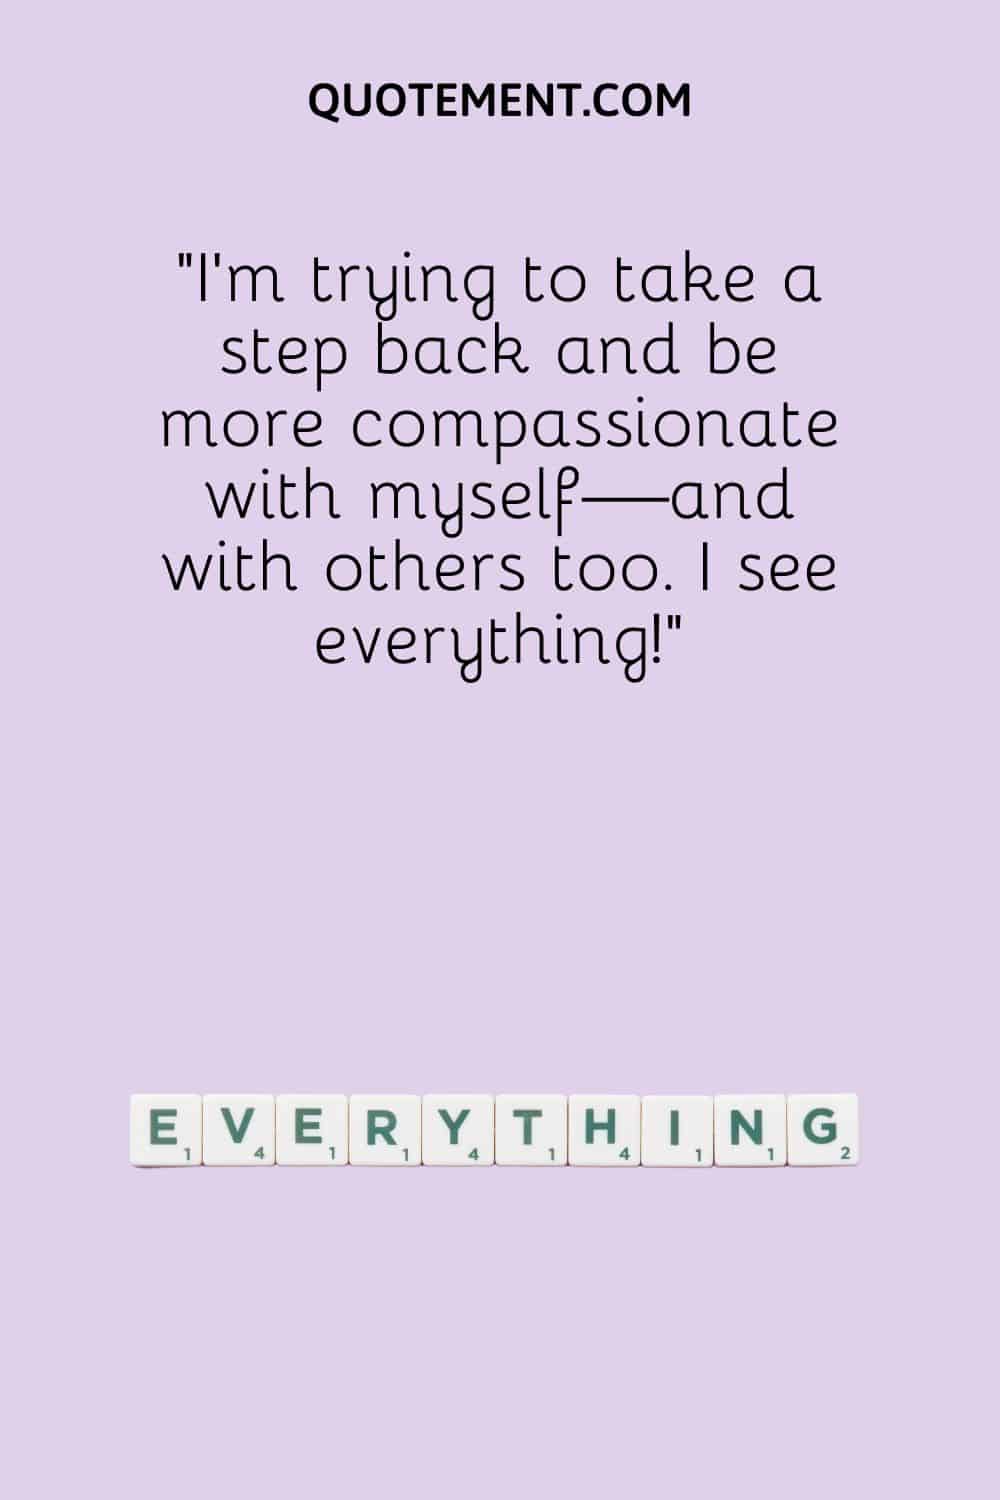 I’m trying to take a step back and be more compassionate with myself—and with others too.